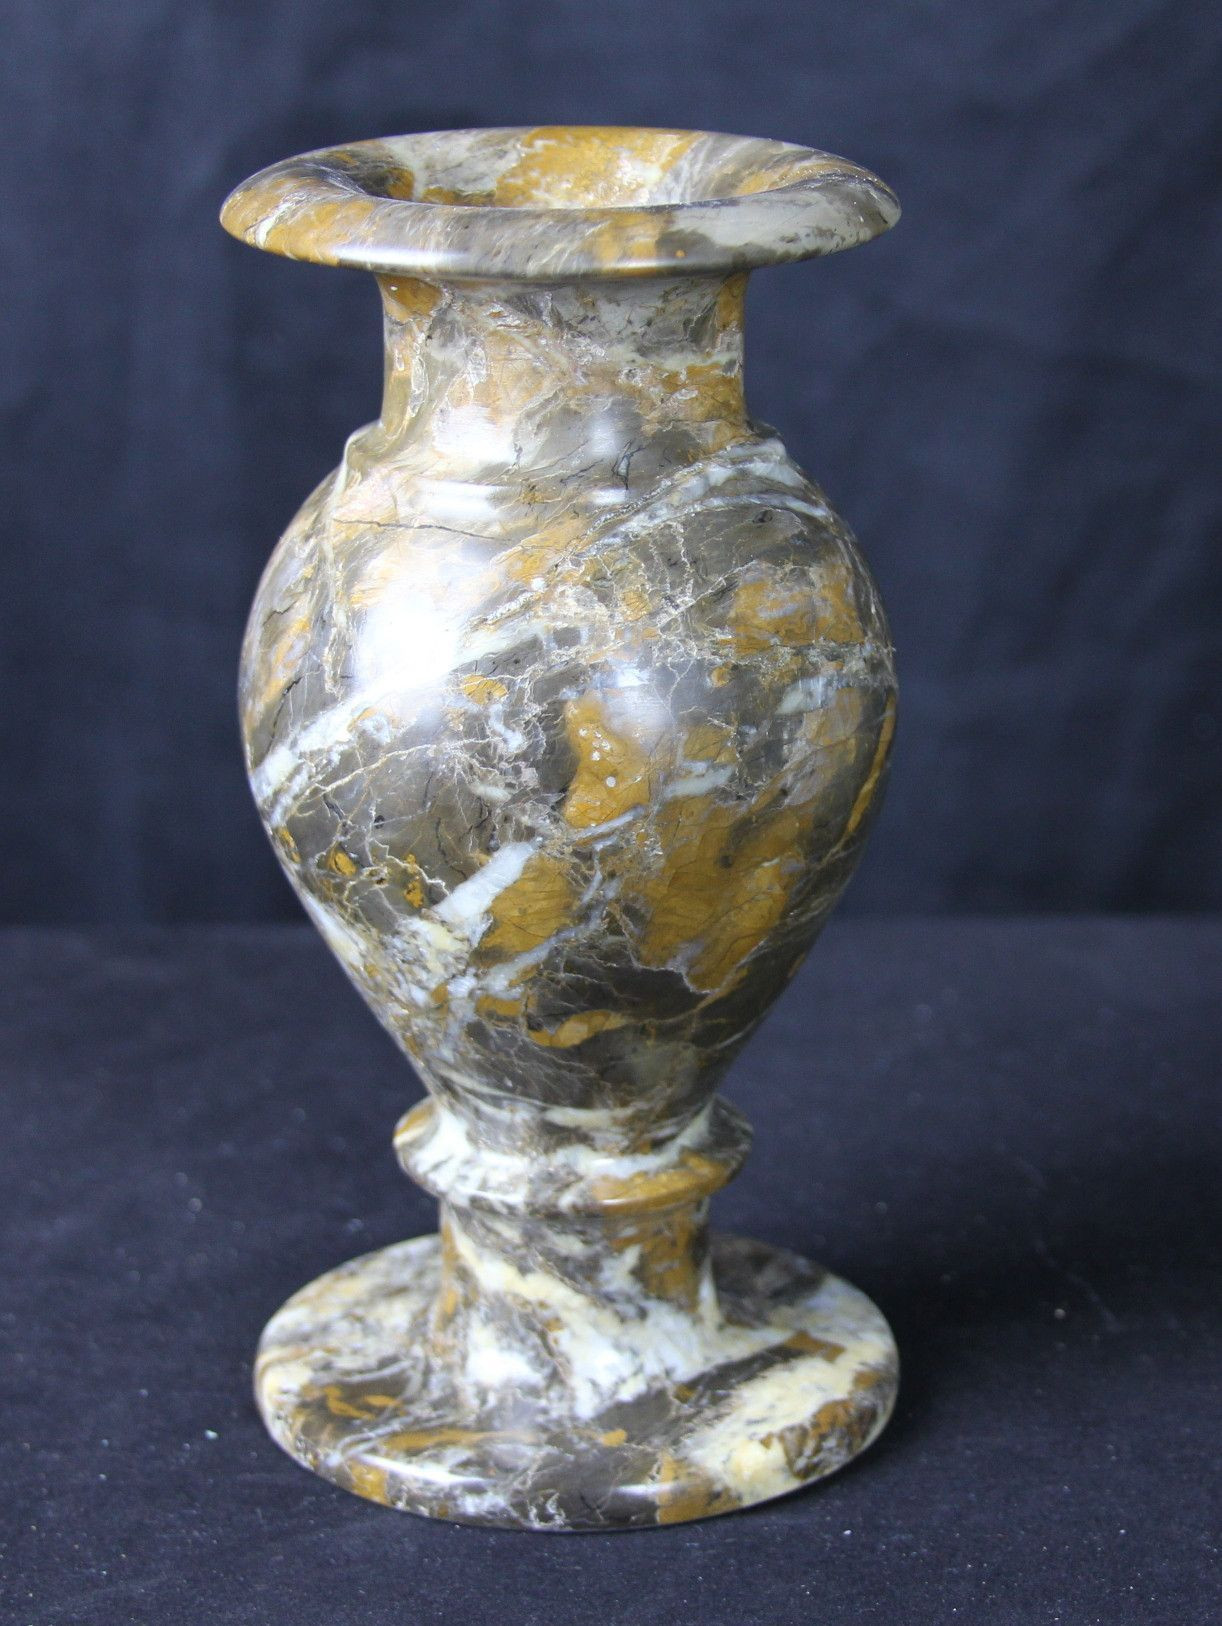 13 Amazing Onyx Vases for Sale 2024 free download onyx vases for sale of michelangelo onyx marble gold zebra vase 12152 products pertaining to michelangelo onyx marble gold zebra vase 12152